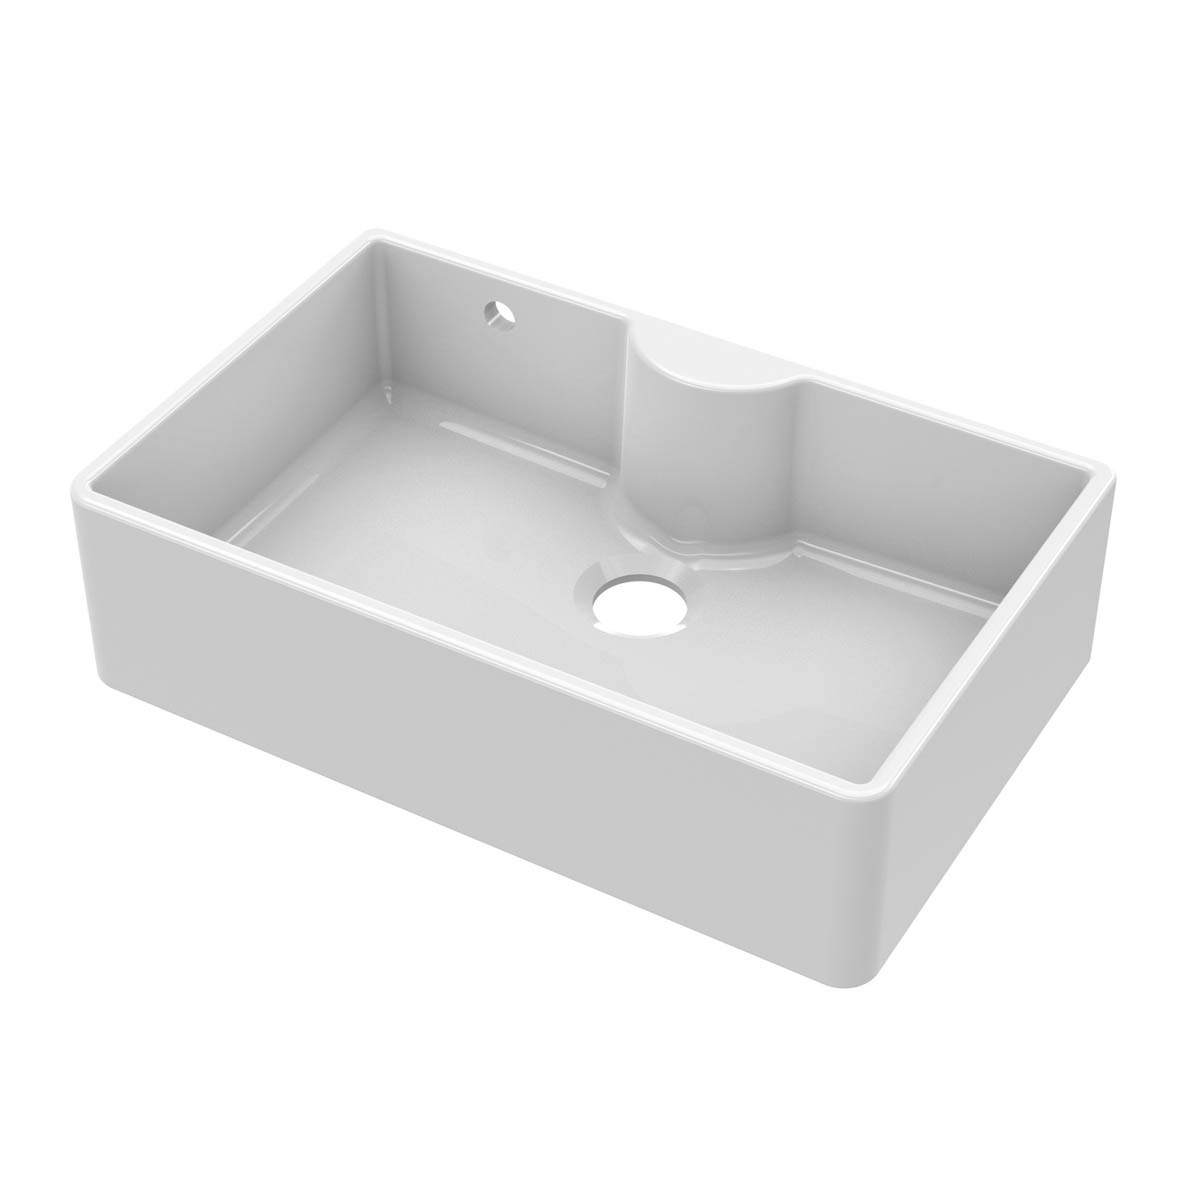 Nuie Butler 795x500x220mm Fireclay Sink with Central Waste, Offset Overflow & Tap Ledge - White (20291)